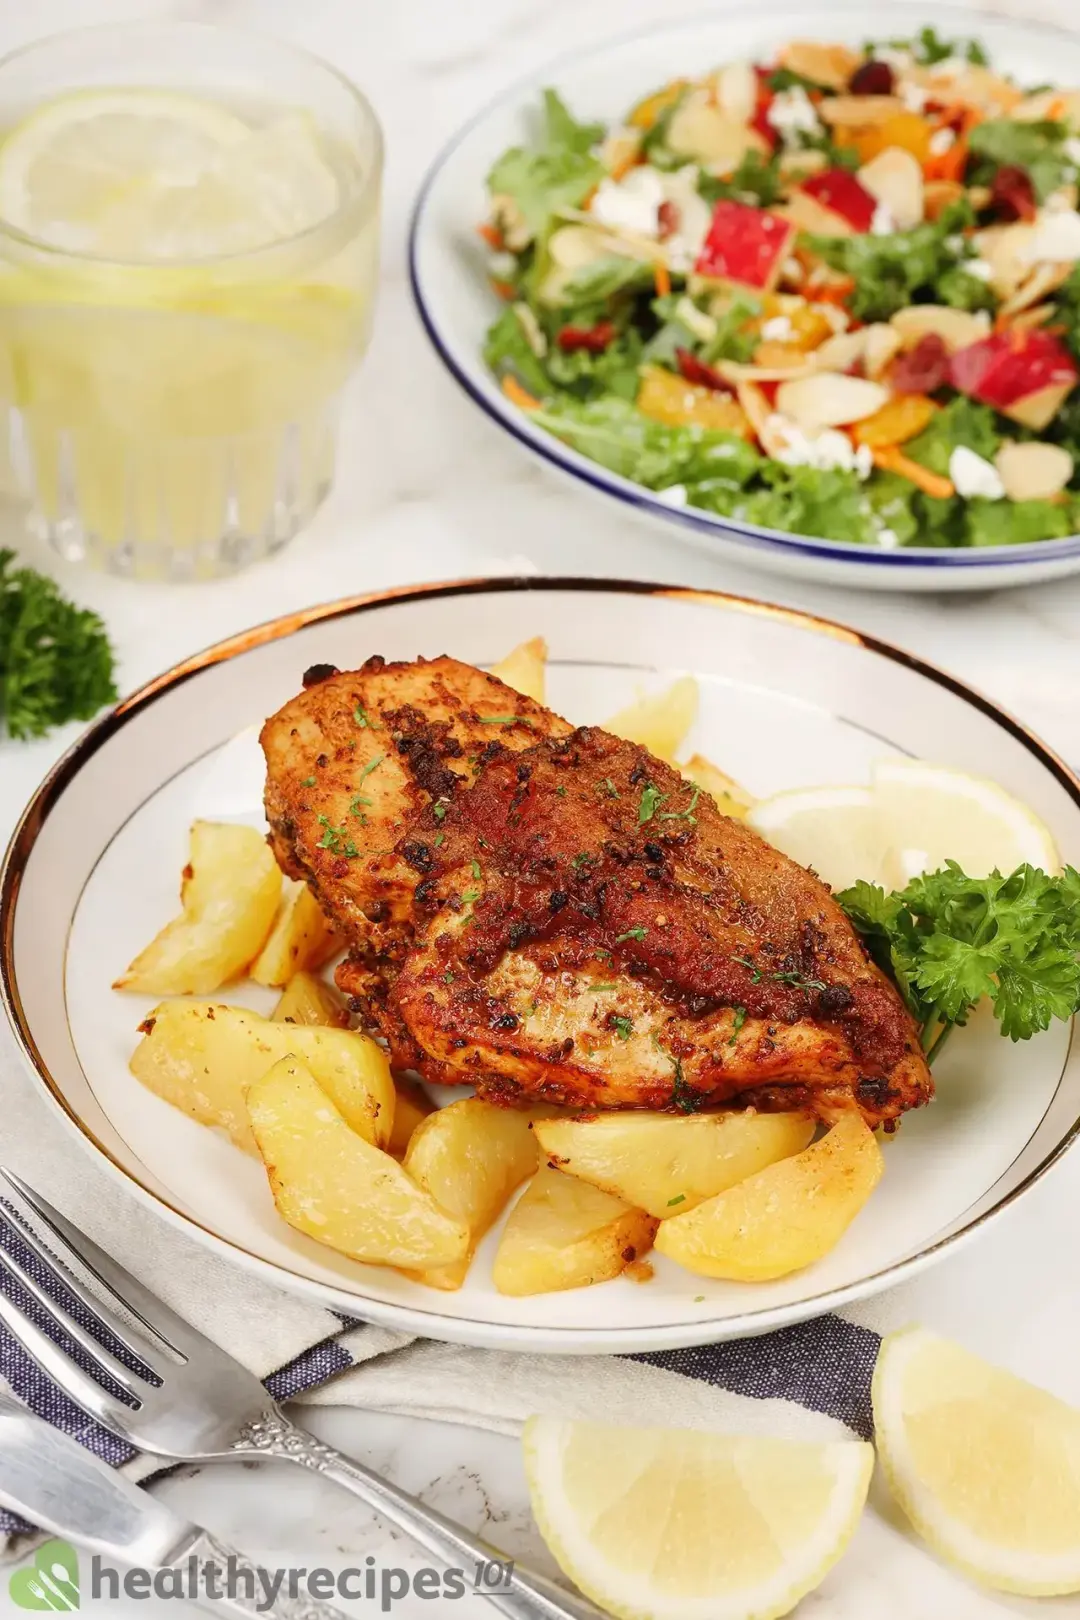 What to Serve With Air Fryer Grilled Chicken